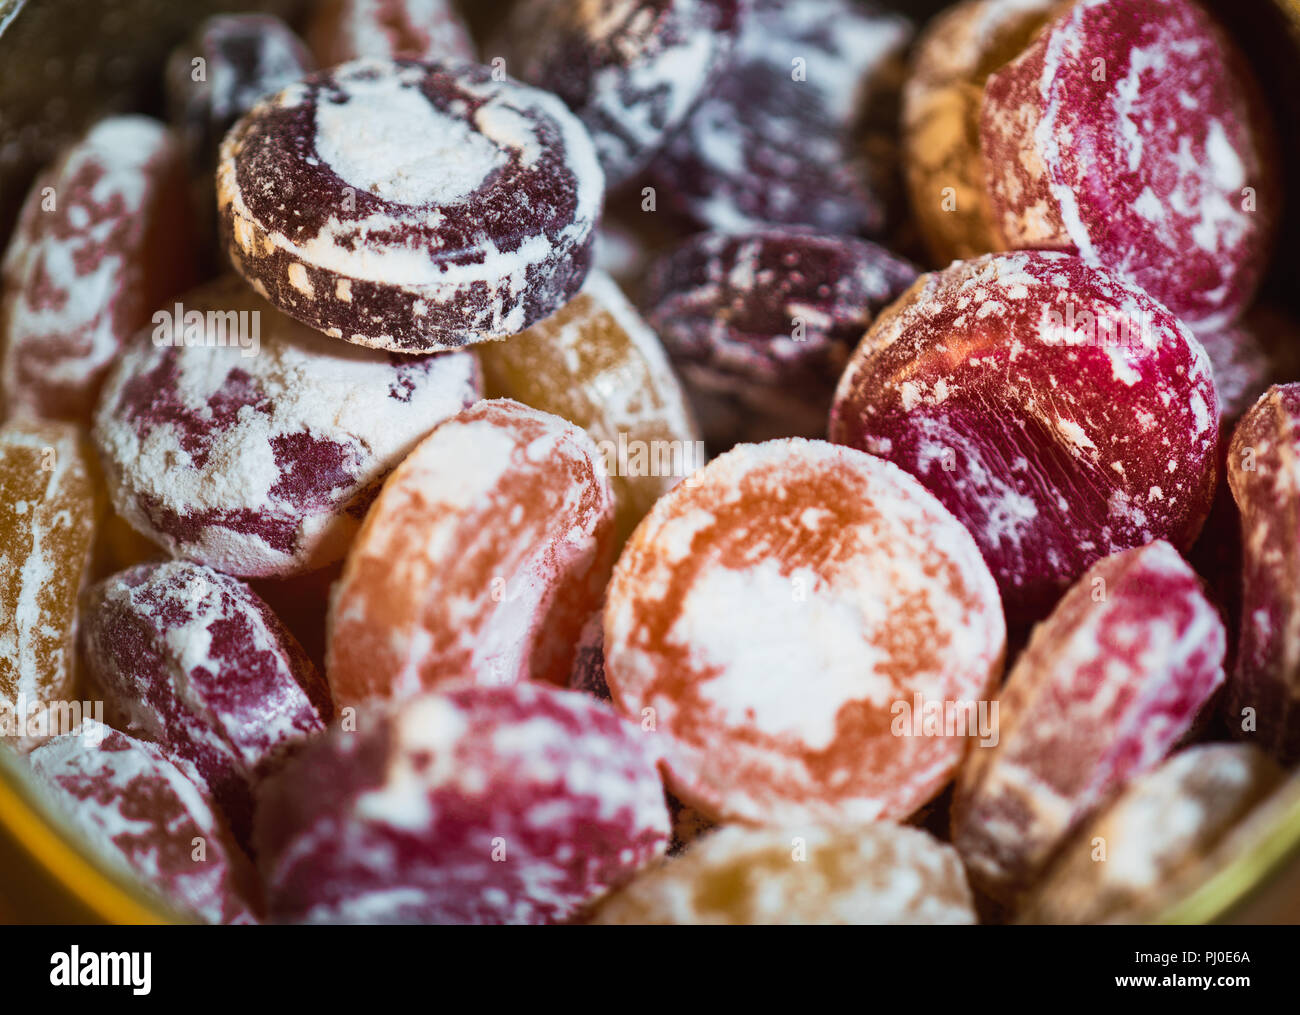 Colorful assortment of Old fashionned fruit flavored hard candy macro shot Stock Photo